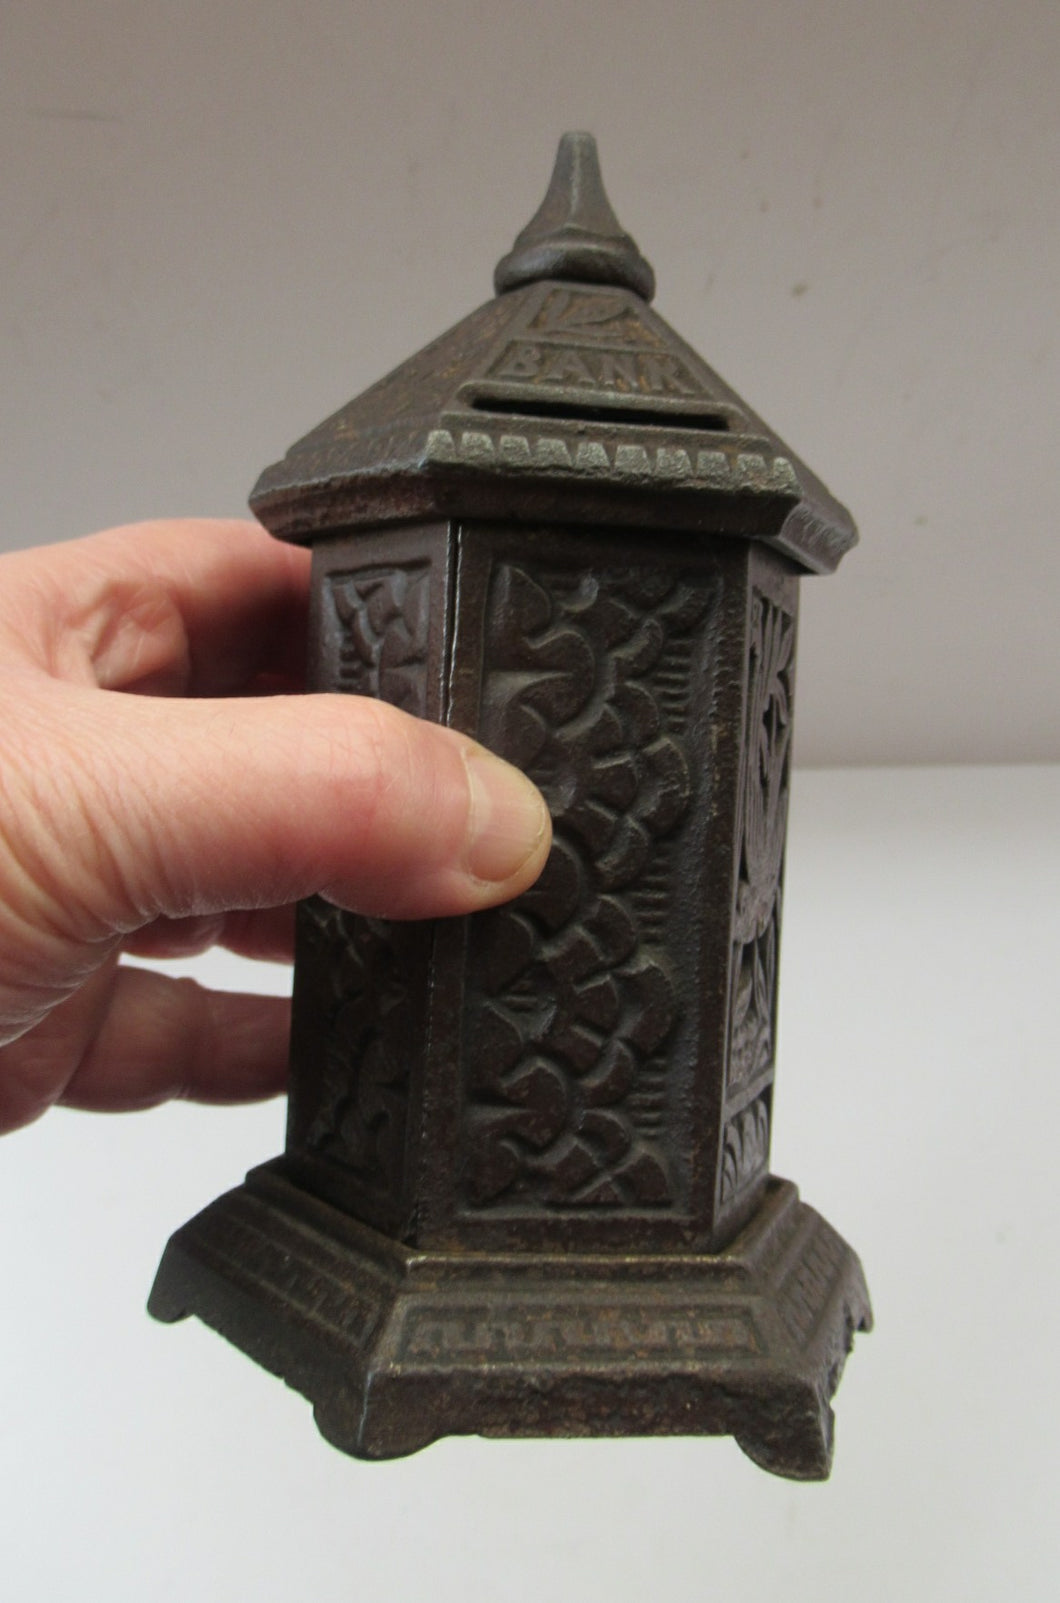 Genuine Victorian Cast Iron Money Bank or Money Box by Chamberland & Hill 